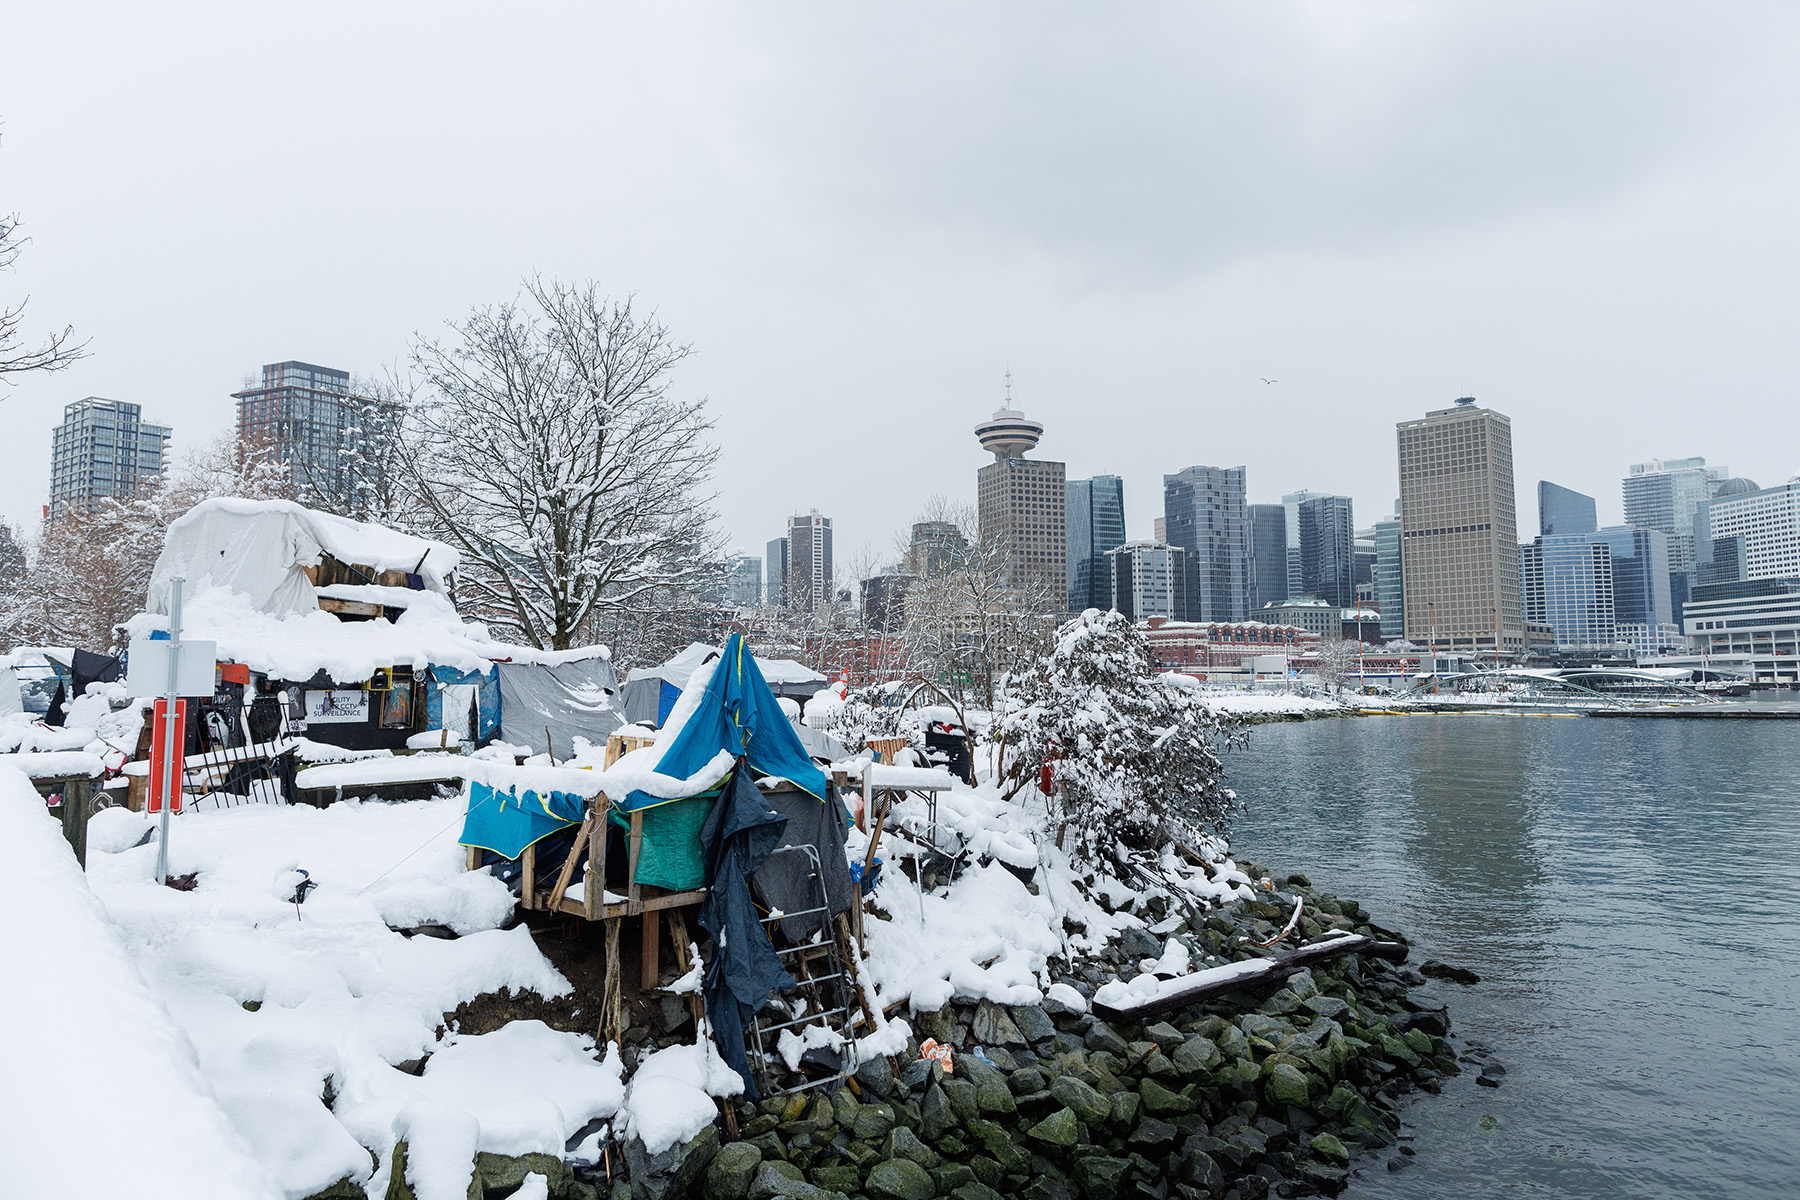 An encampment along the water's edge with the downtown Vancouver skyline in the background.